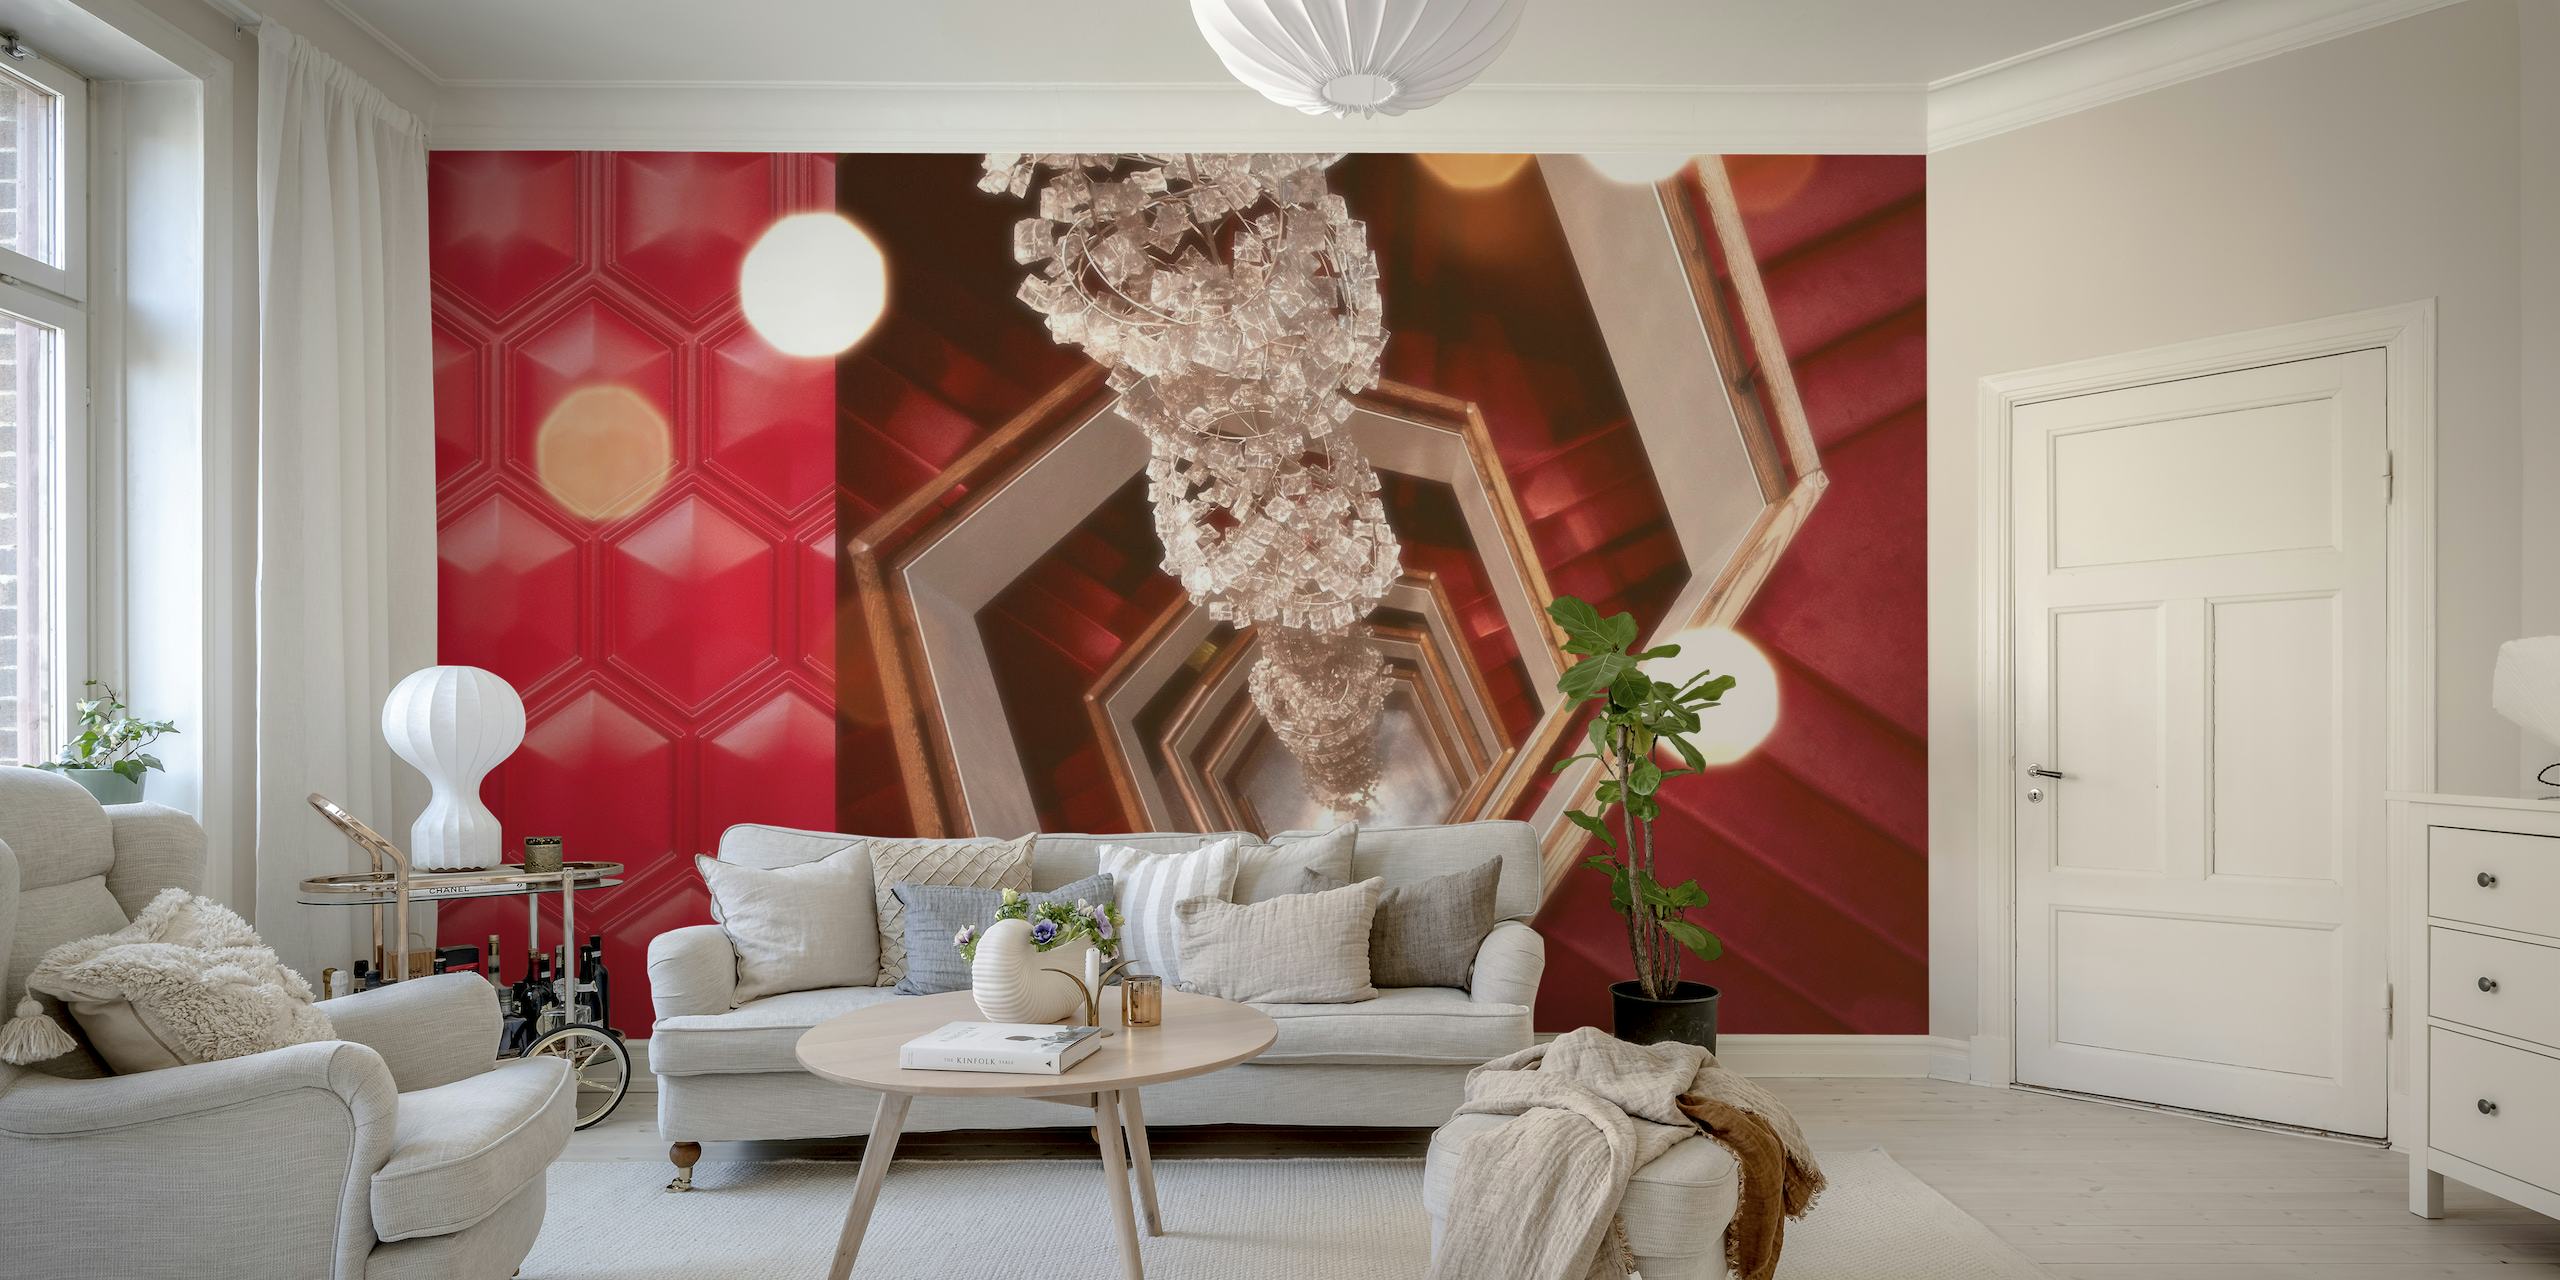 Vintage chandelier and geometric patterns in a movie theatre inspired wall mural